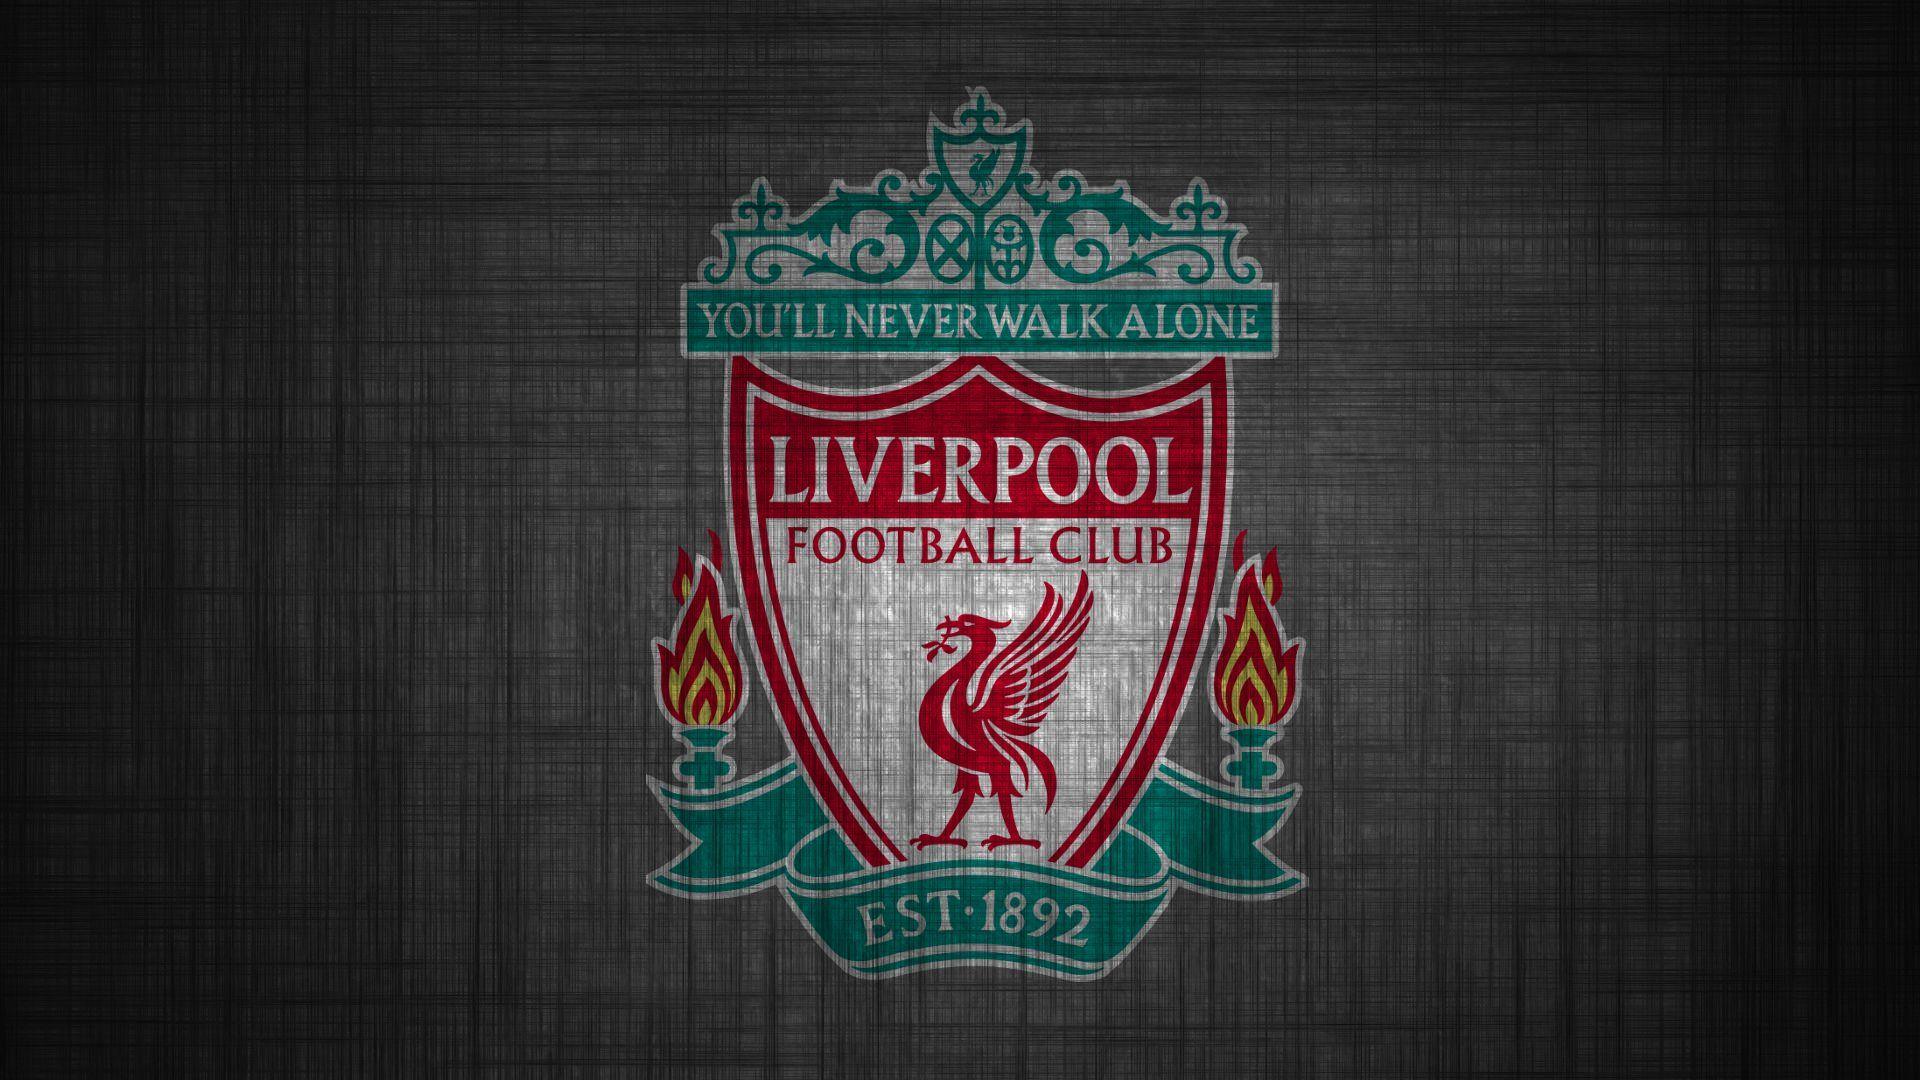 Awesome Liverpool Wallpaper 2016 HD Image Fc Logo Themes Llectwallm